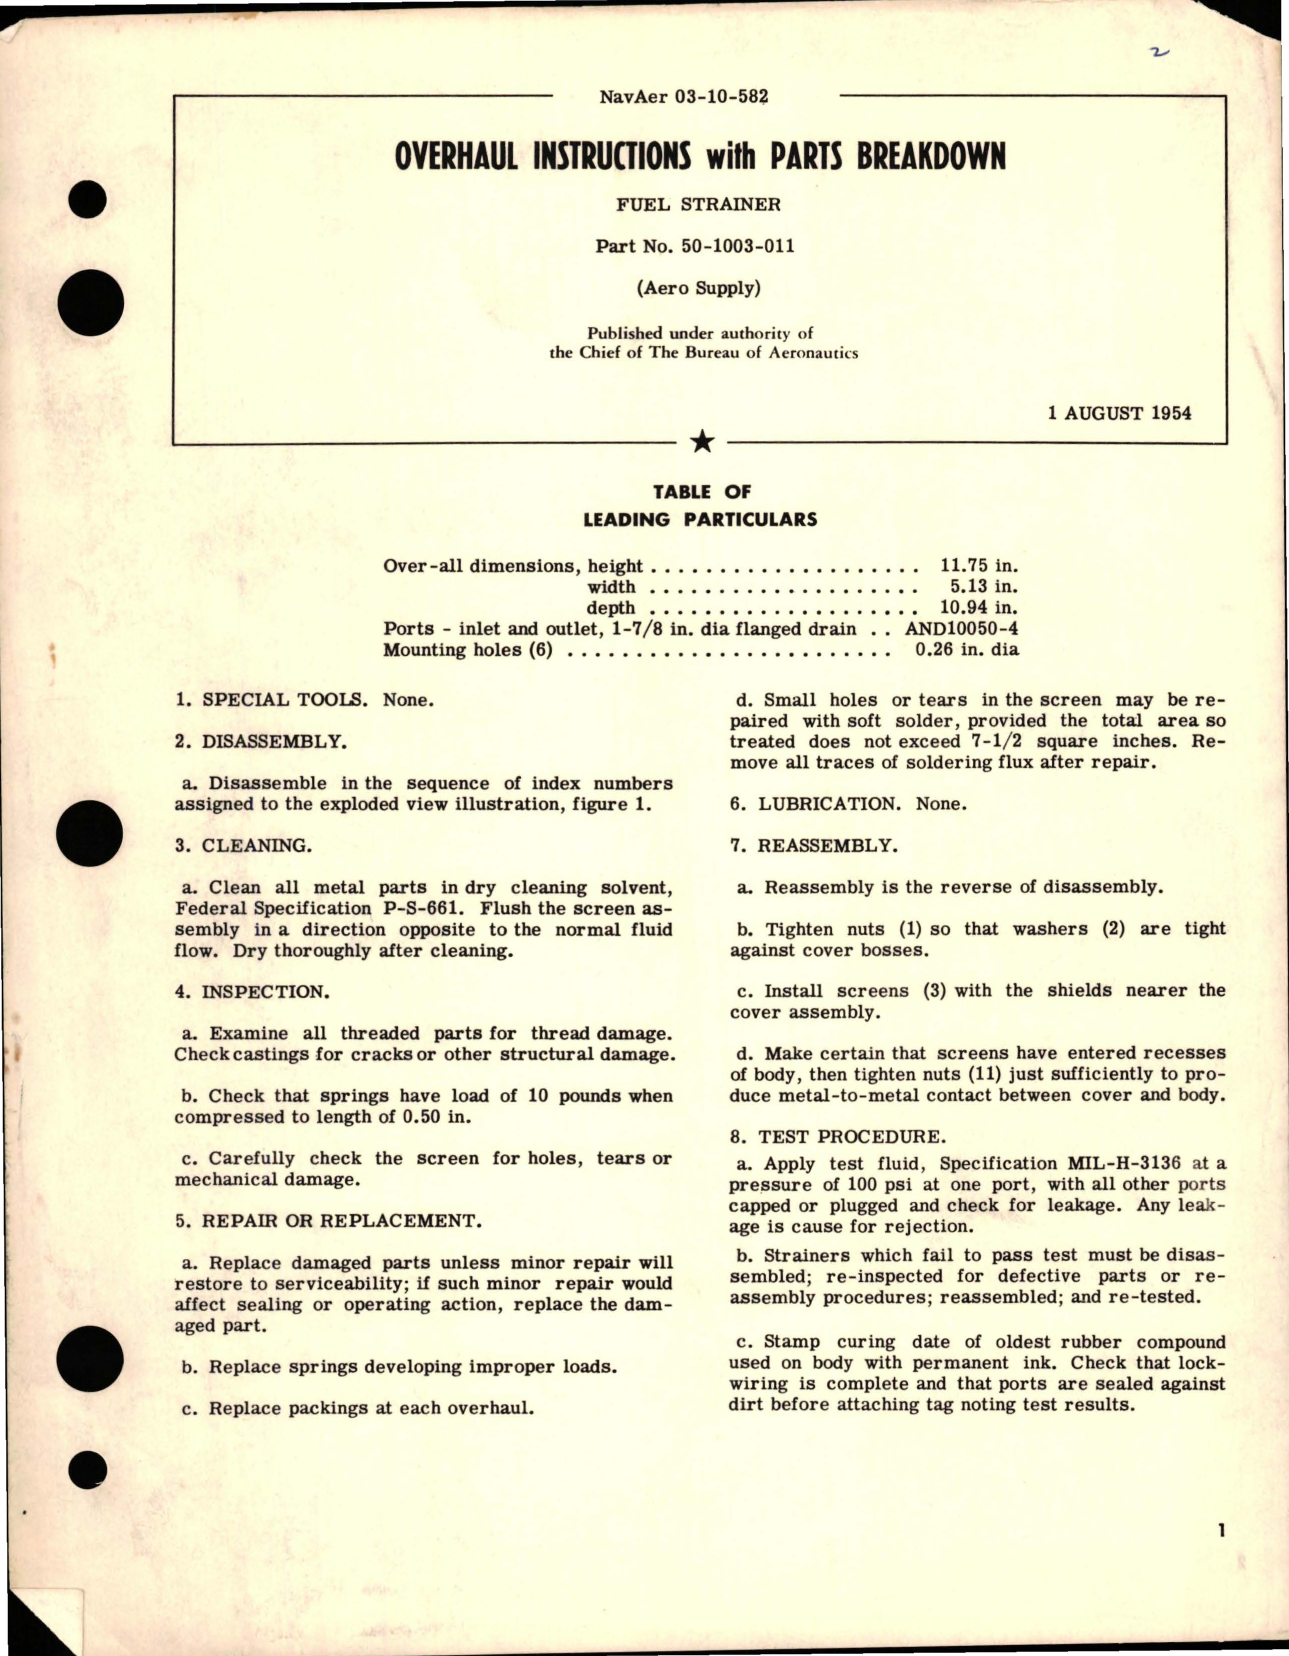 Sample page 1 from AirCorps Library document: Overhaul Instructions with Parts Breakdown for Fuel Strainer - Part 50-1003-011